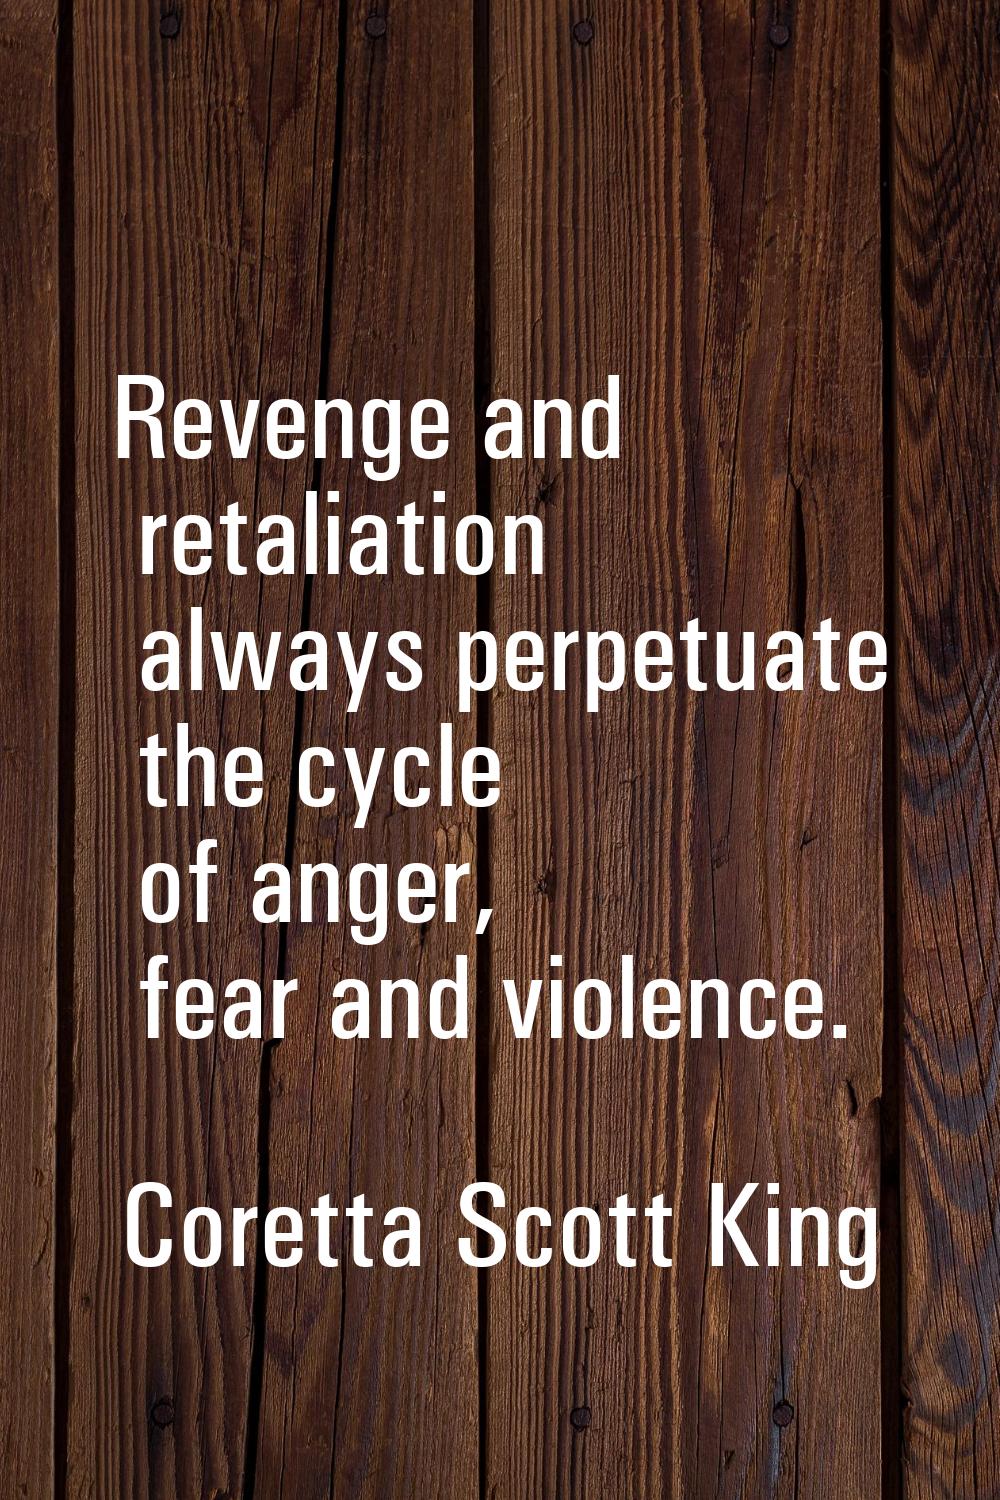 Revenge and retaliation always perpetuate the cycle of anger, fear and violence.